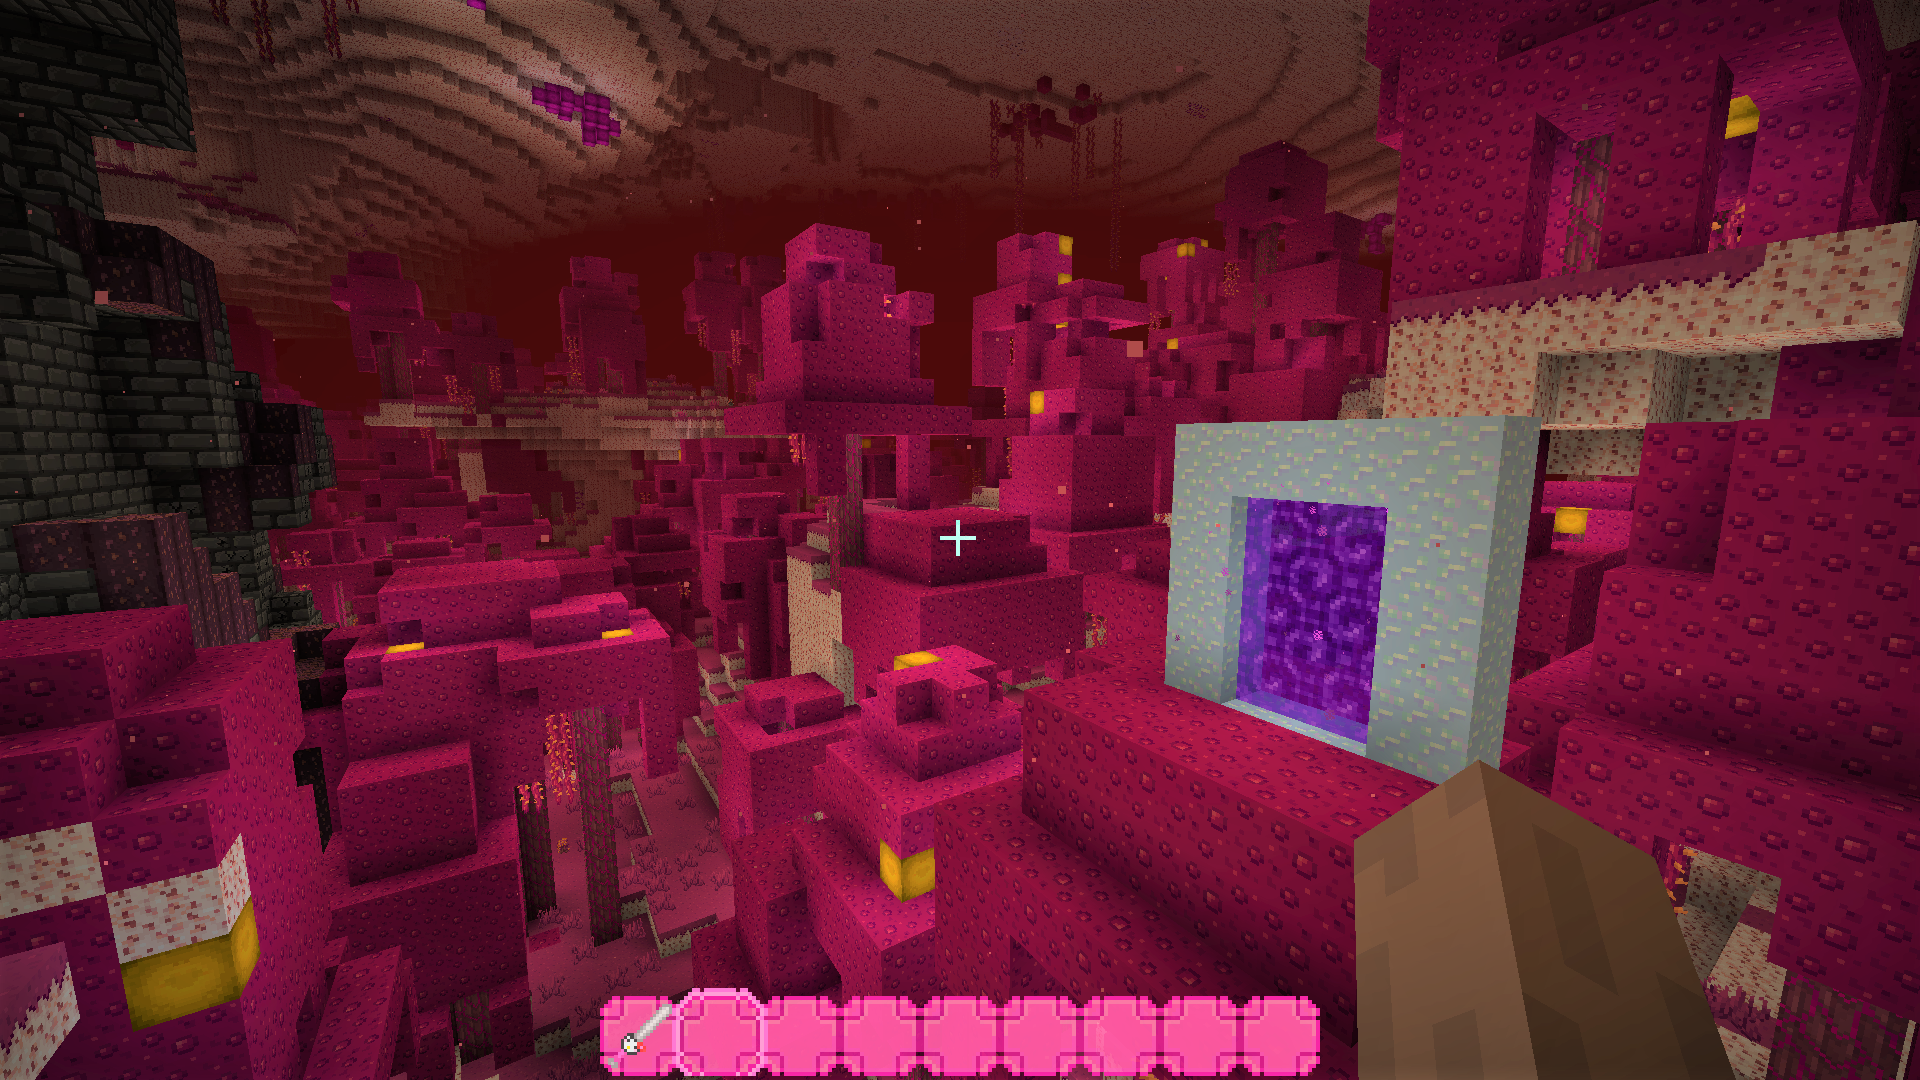 Minecraft texture pack - Cute - A Minecraft hotbar that's entirely pink in the Nether which is also made of pink Netherrack